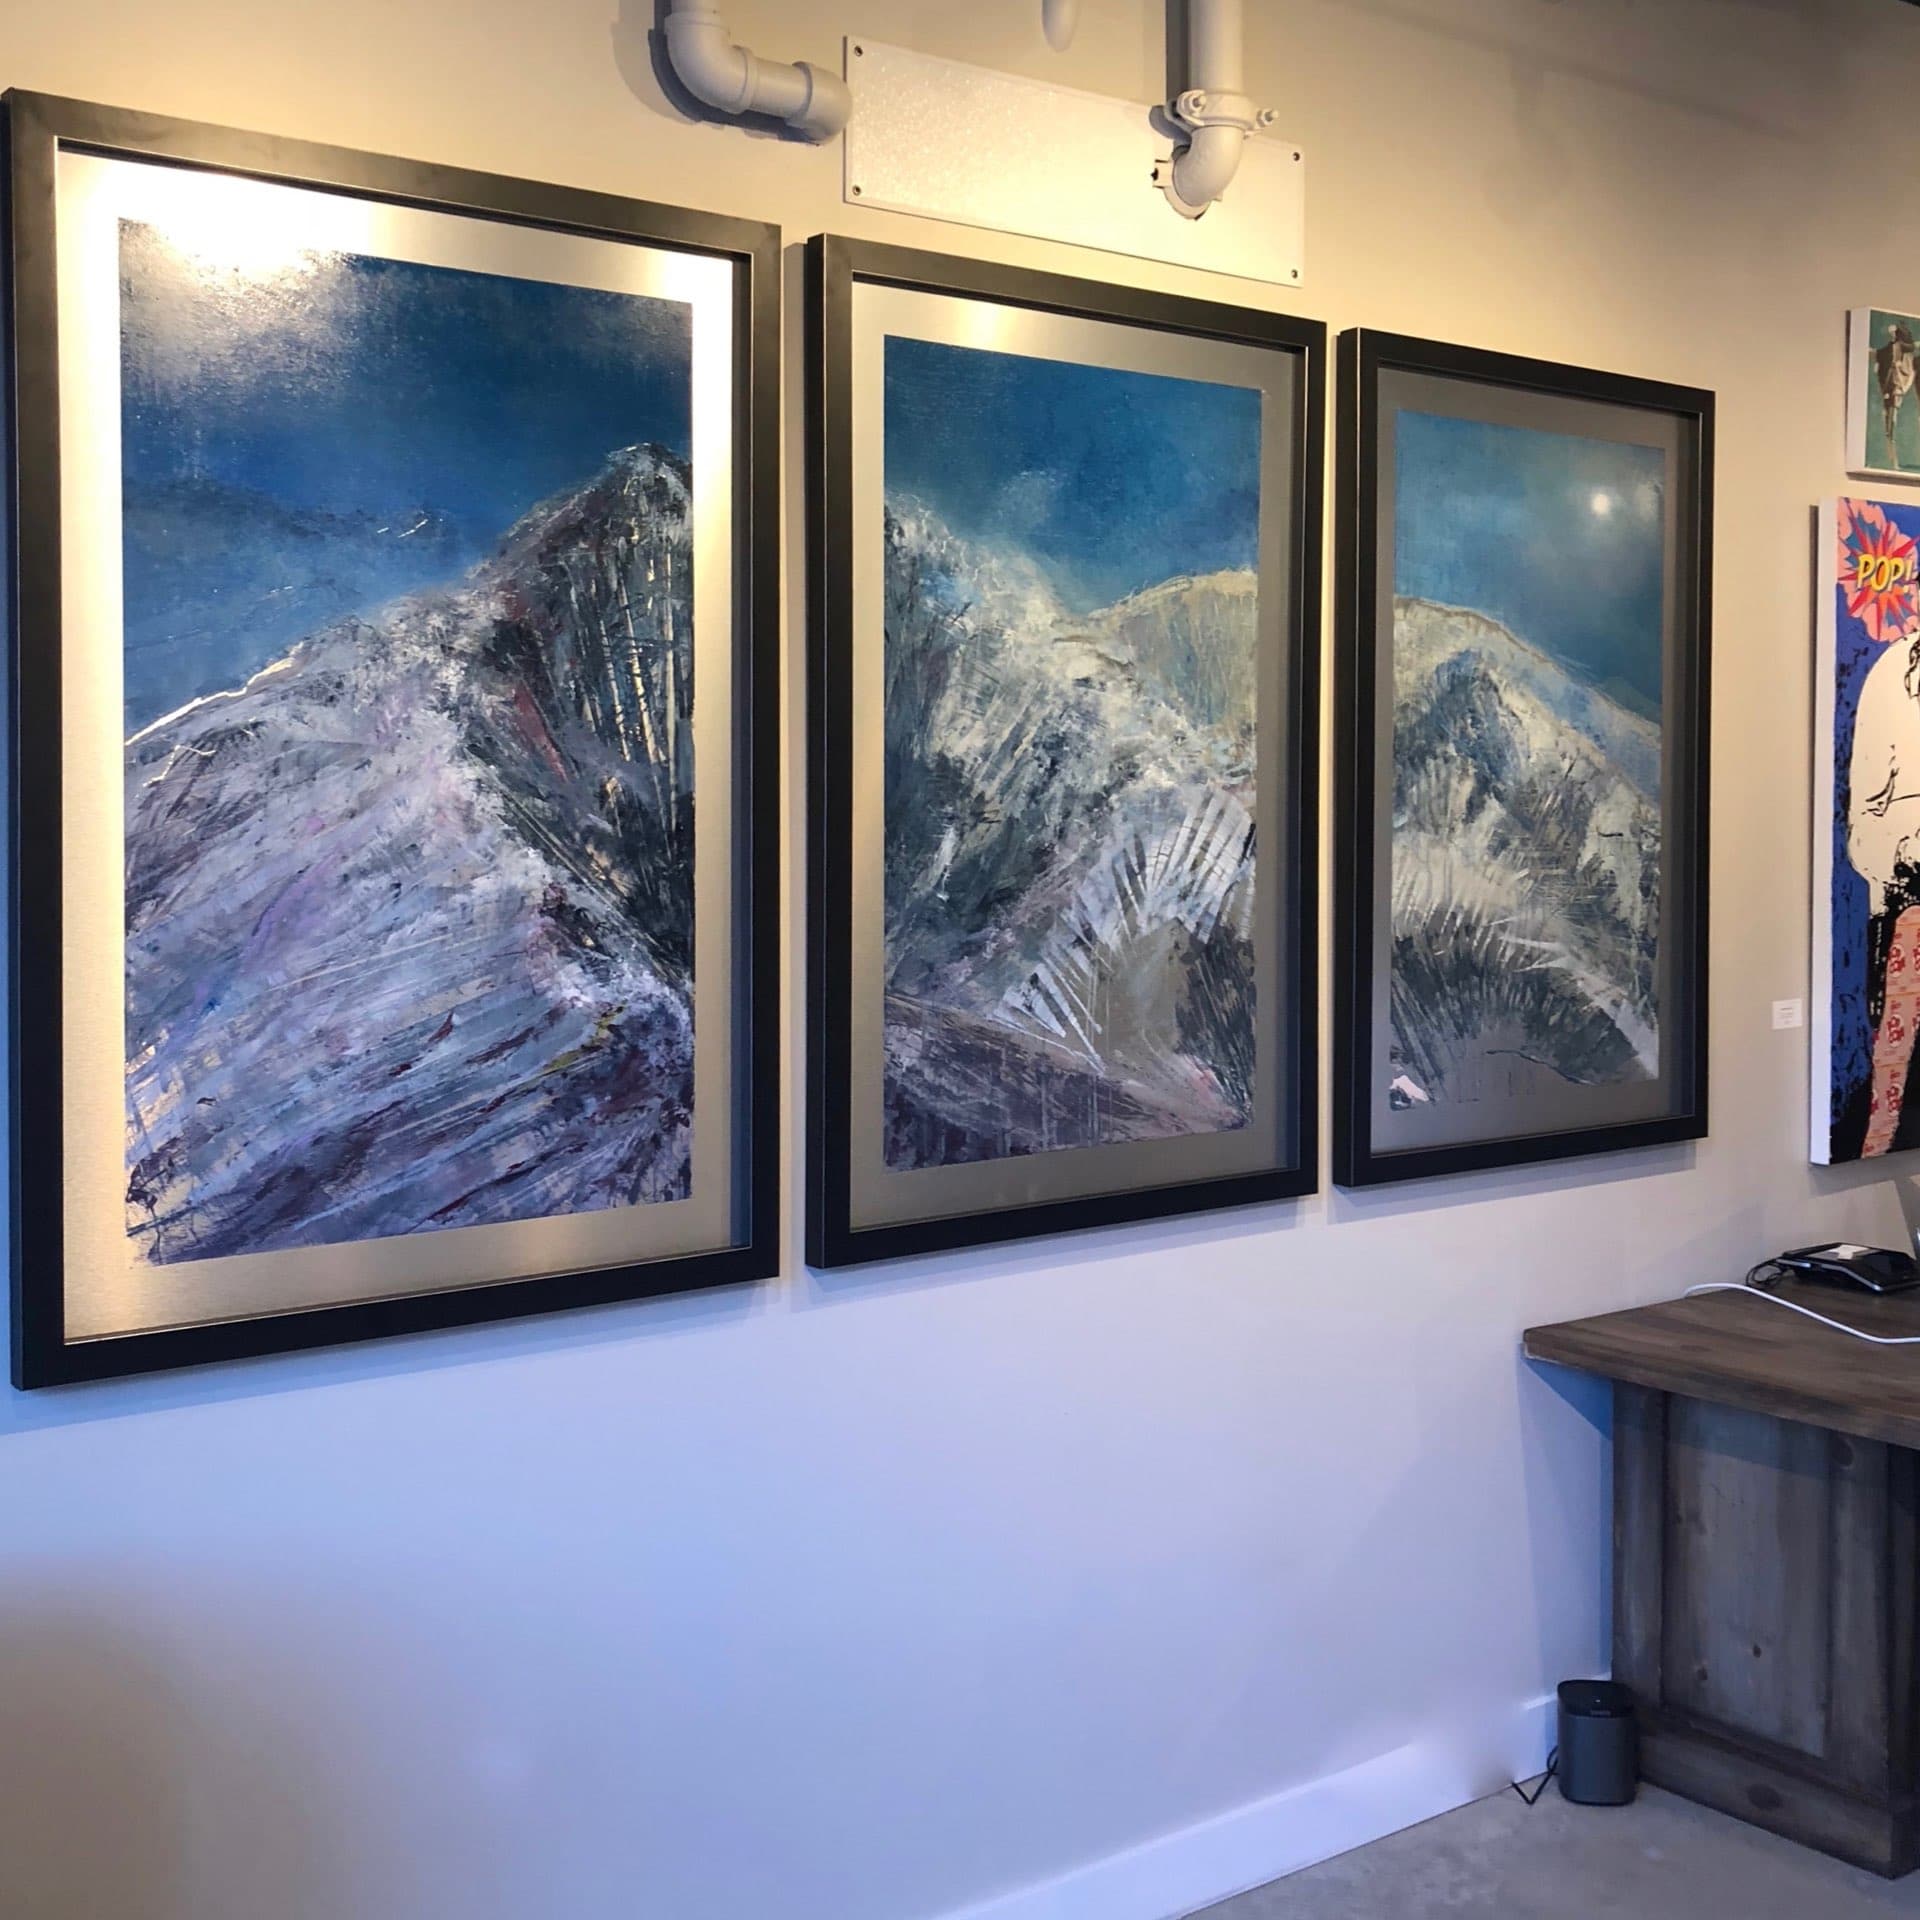 Silvery Moon Triptych, Contemporary oil painting on metal inspired by moonlit mountains in the Wasatch Back, Fine Art by Cynthia McLoughlin